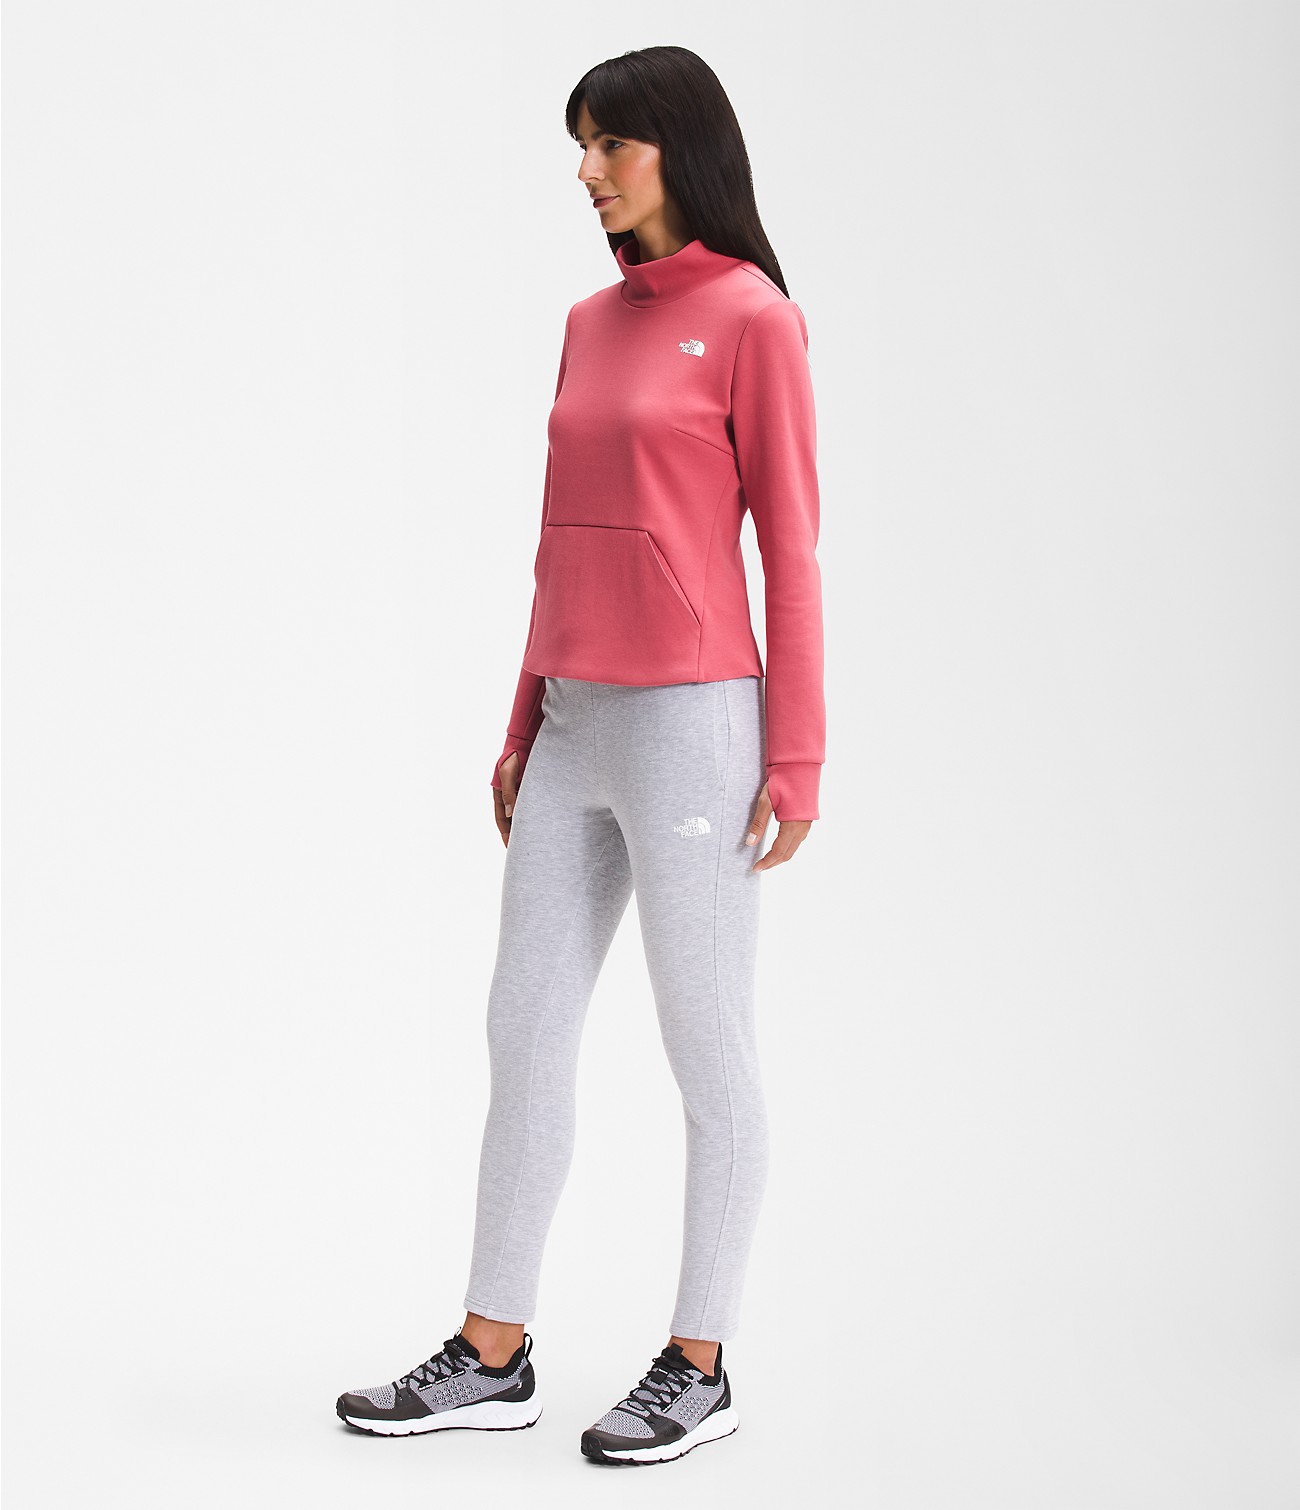 Women’s City Standard Double-Knit Funnel Neck | The North Face